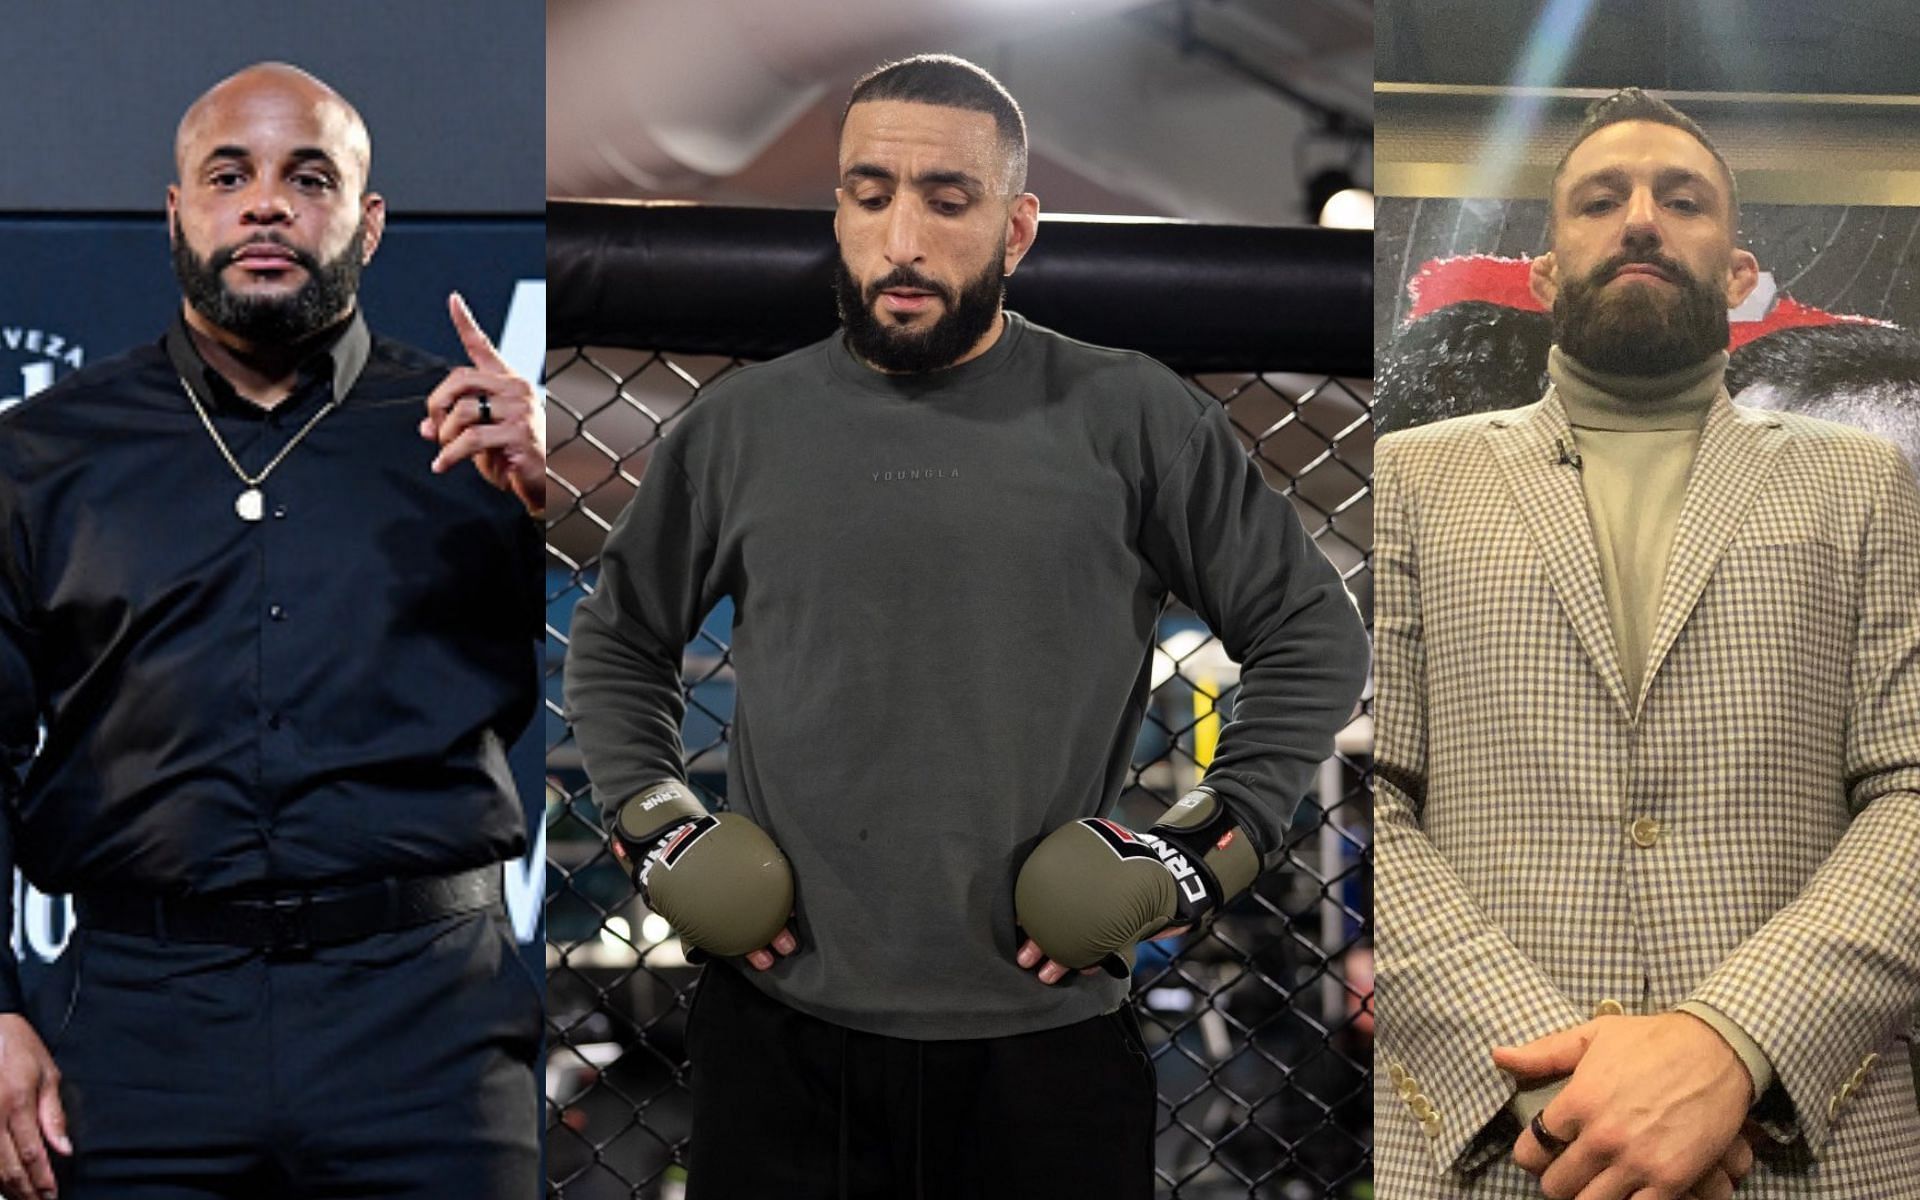 (L-R) Daniel Cormier, Belal Muhammad, and Michael Chiesa [Images courtesy @bulyb170 and @mikemav22 on Instagram]